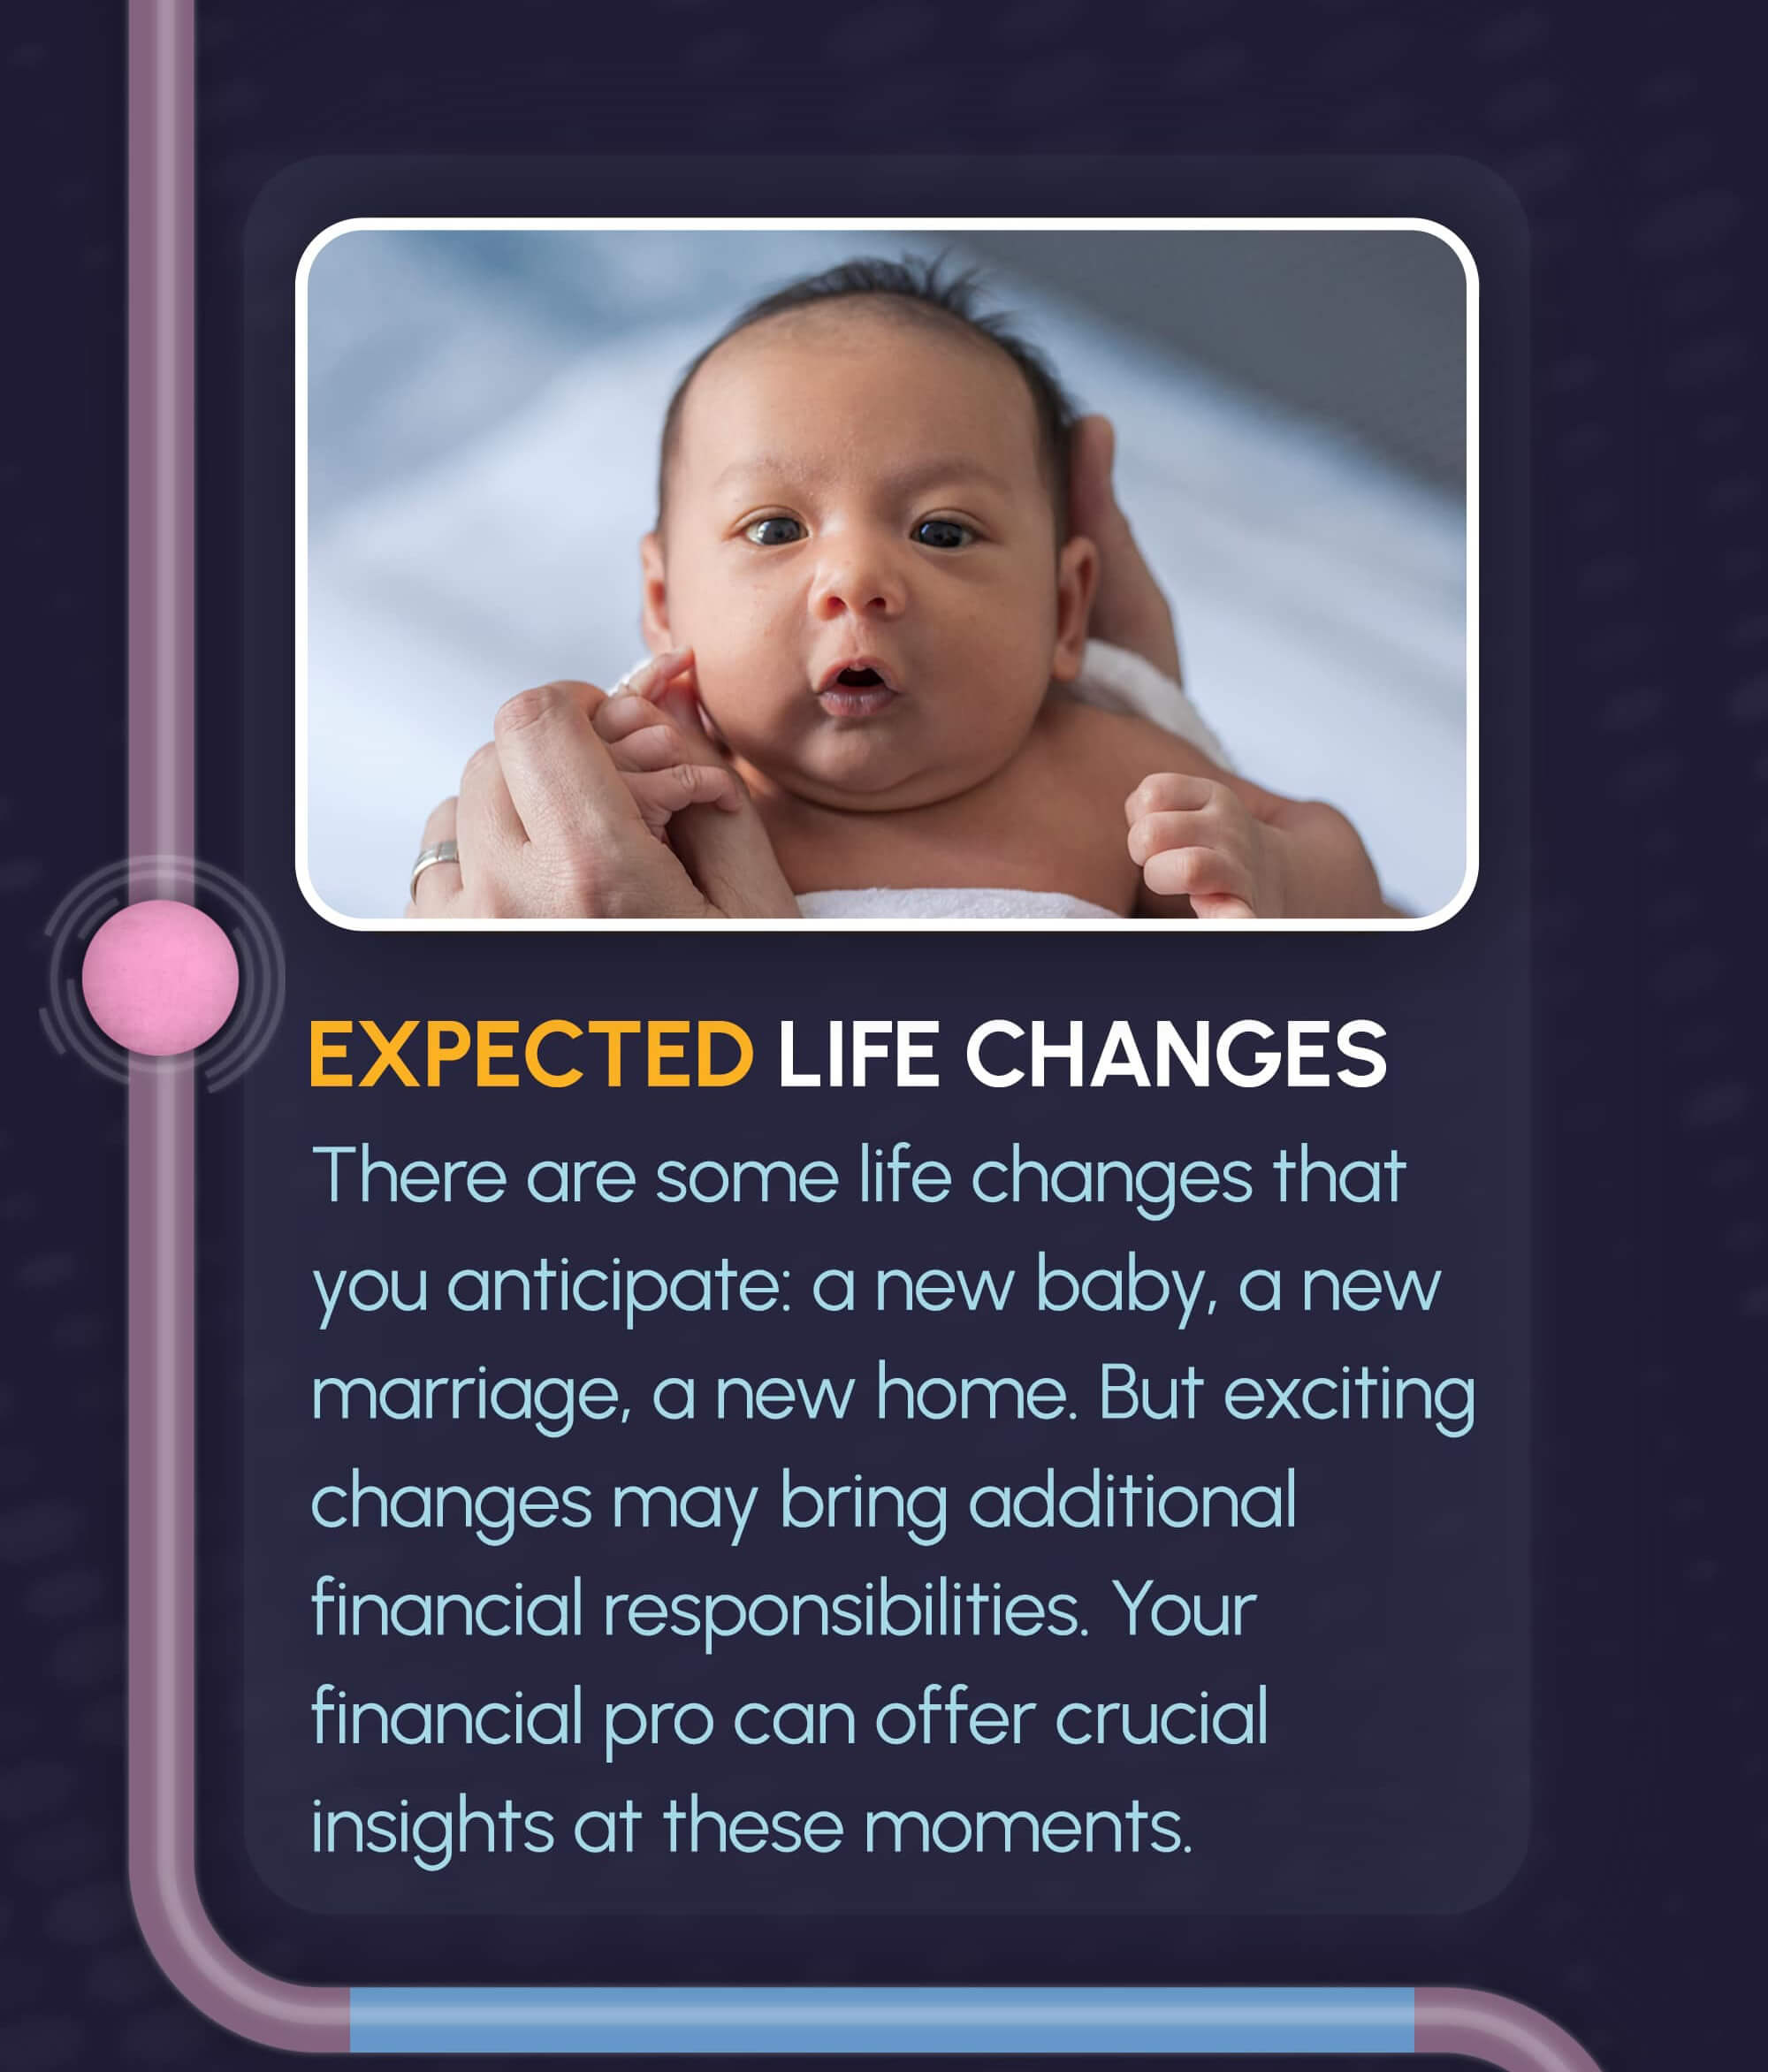 The path from the labyrinth leads down to the first image and text. The image is a baby being held in hands and facing the camera, with the title underneath reading, Expected Life Changes. The text underneath reads, there are some life changes that you anticipate: a new baby, a new marriage, a new home. But exciting changes may bring additional financial responsibilities. Your financial pro can offer crucial insights at these moments.